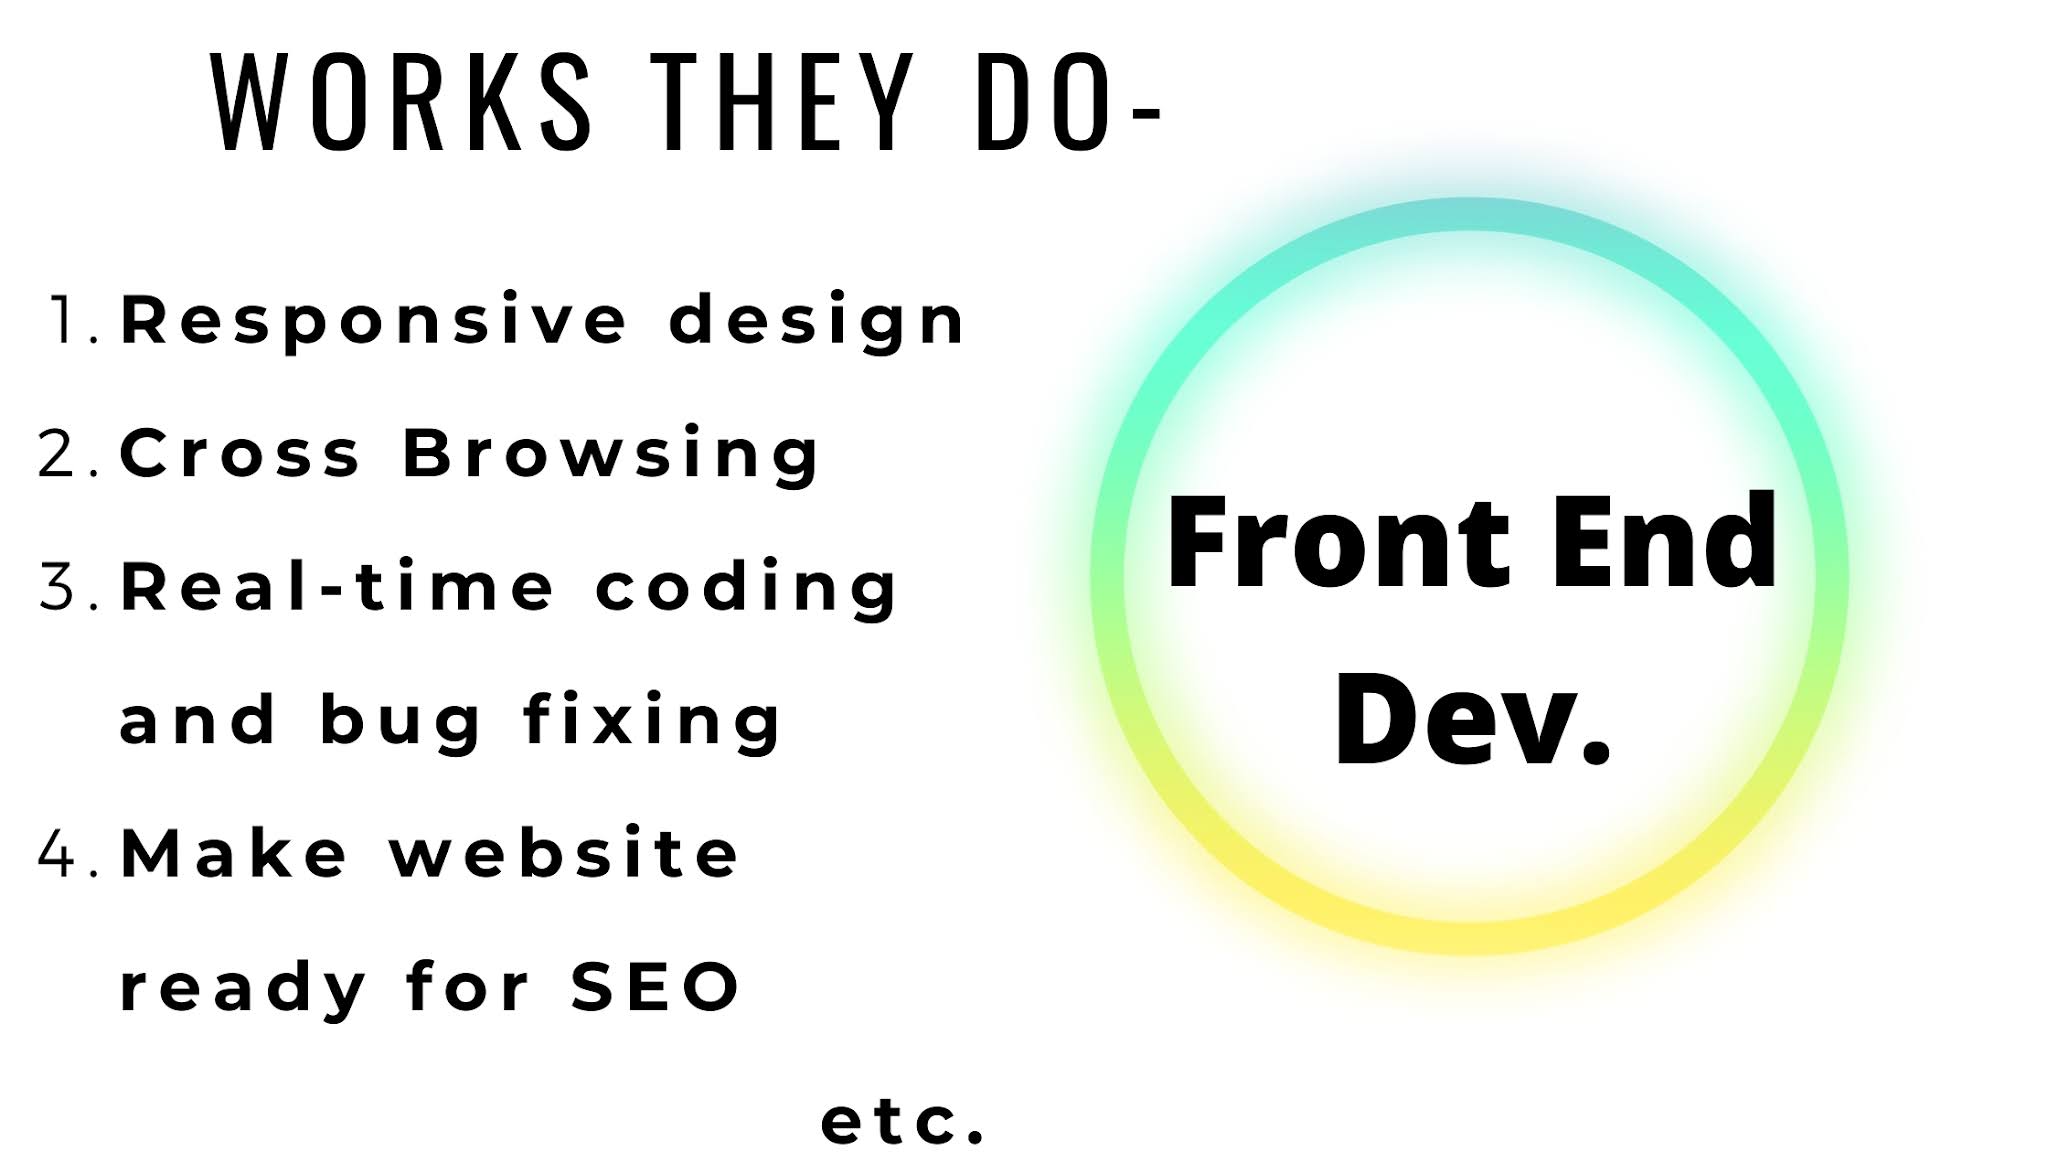 working of a Front-end dev.